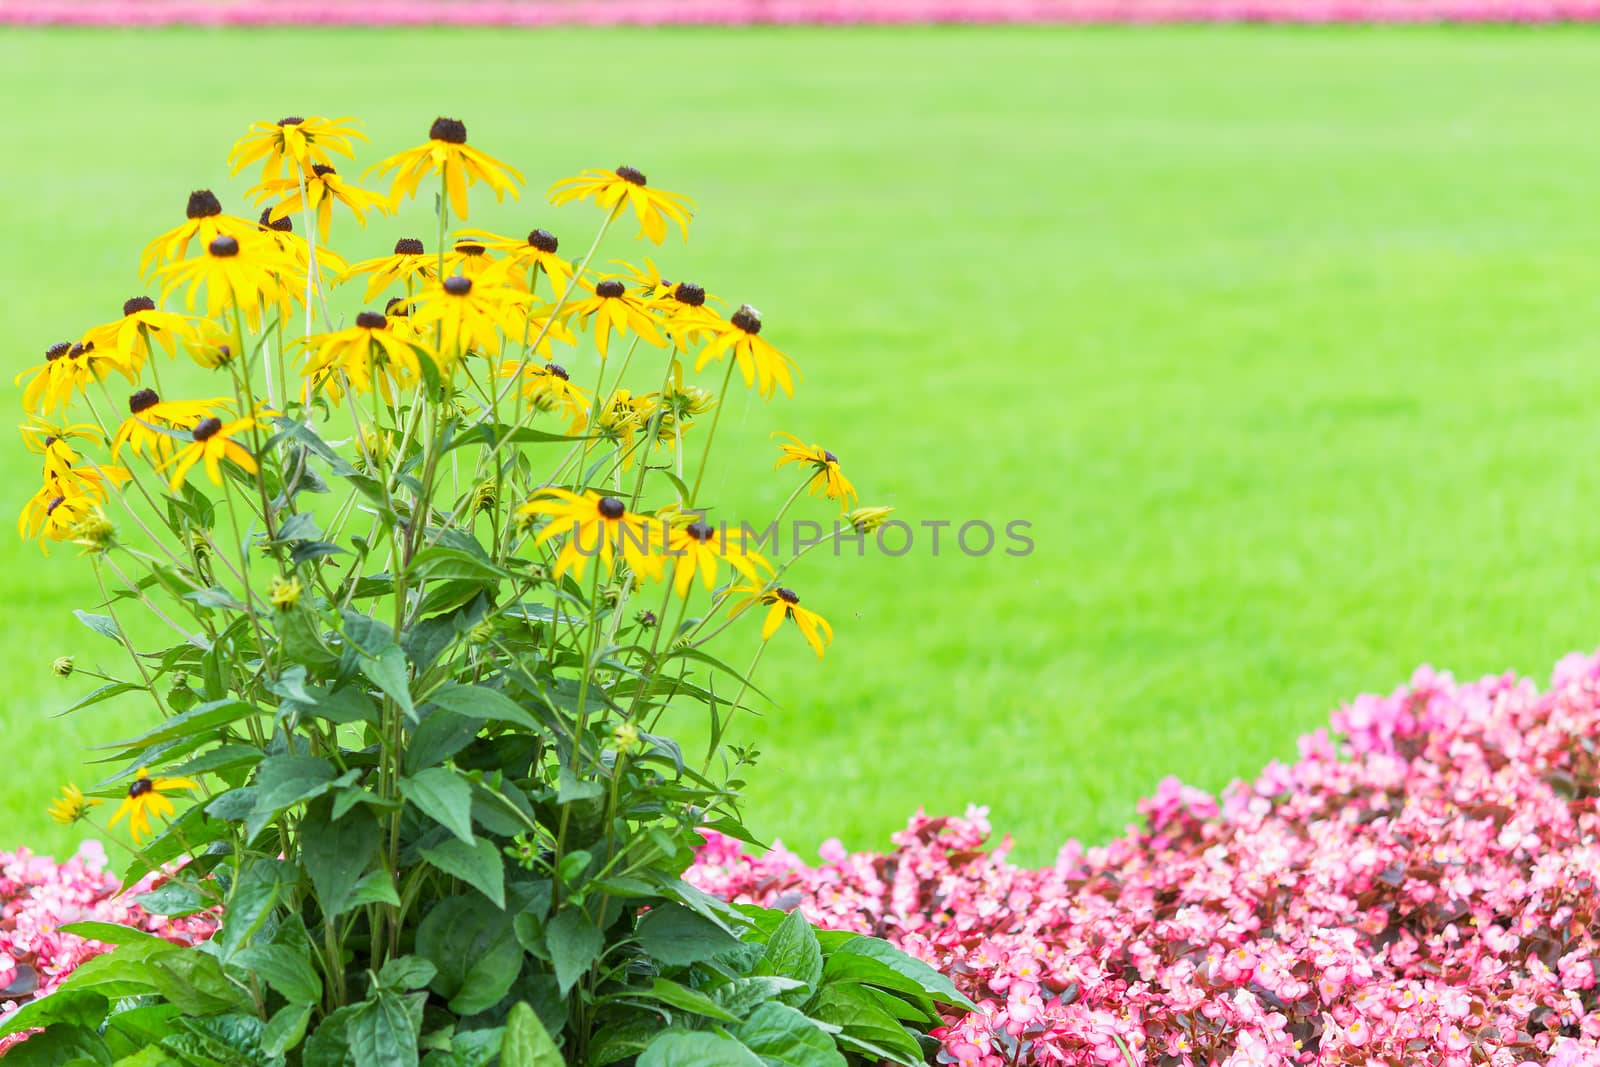 Floral frame backdrop with yellow and pink garden flowers against blurred green fresh grass with free copy-space place text